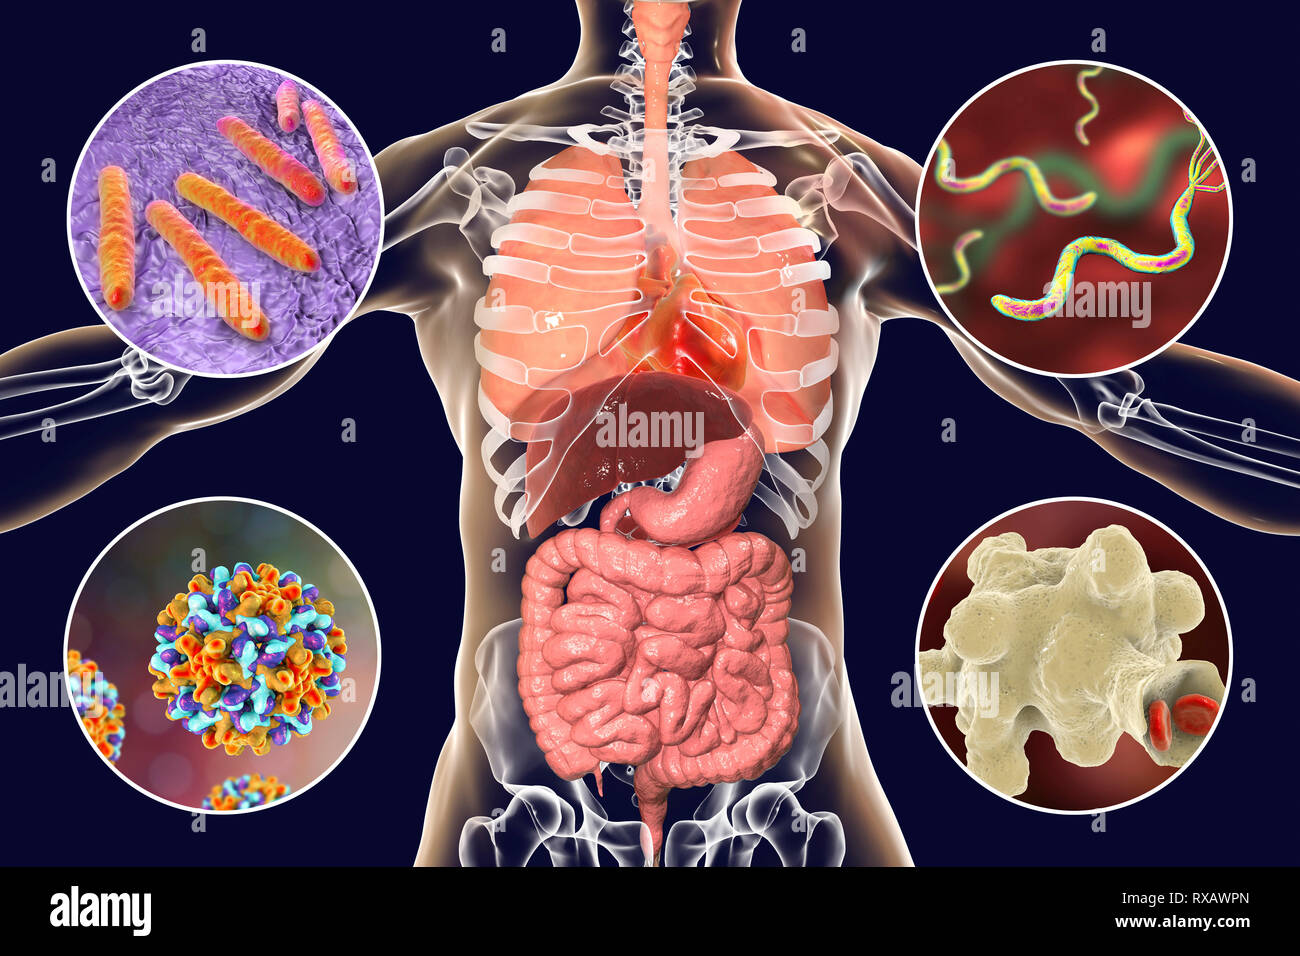 Bacteria that cause human infections, illustration Stock Photo